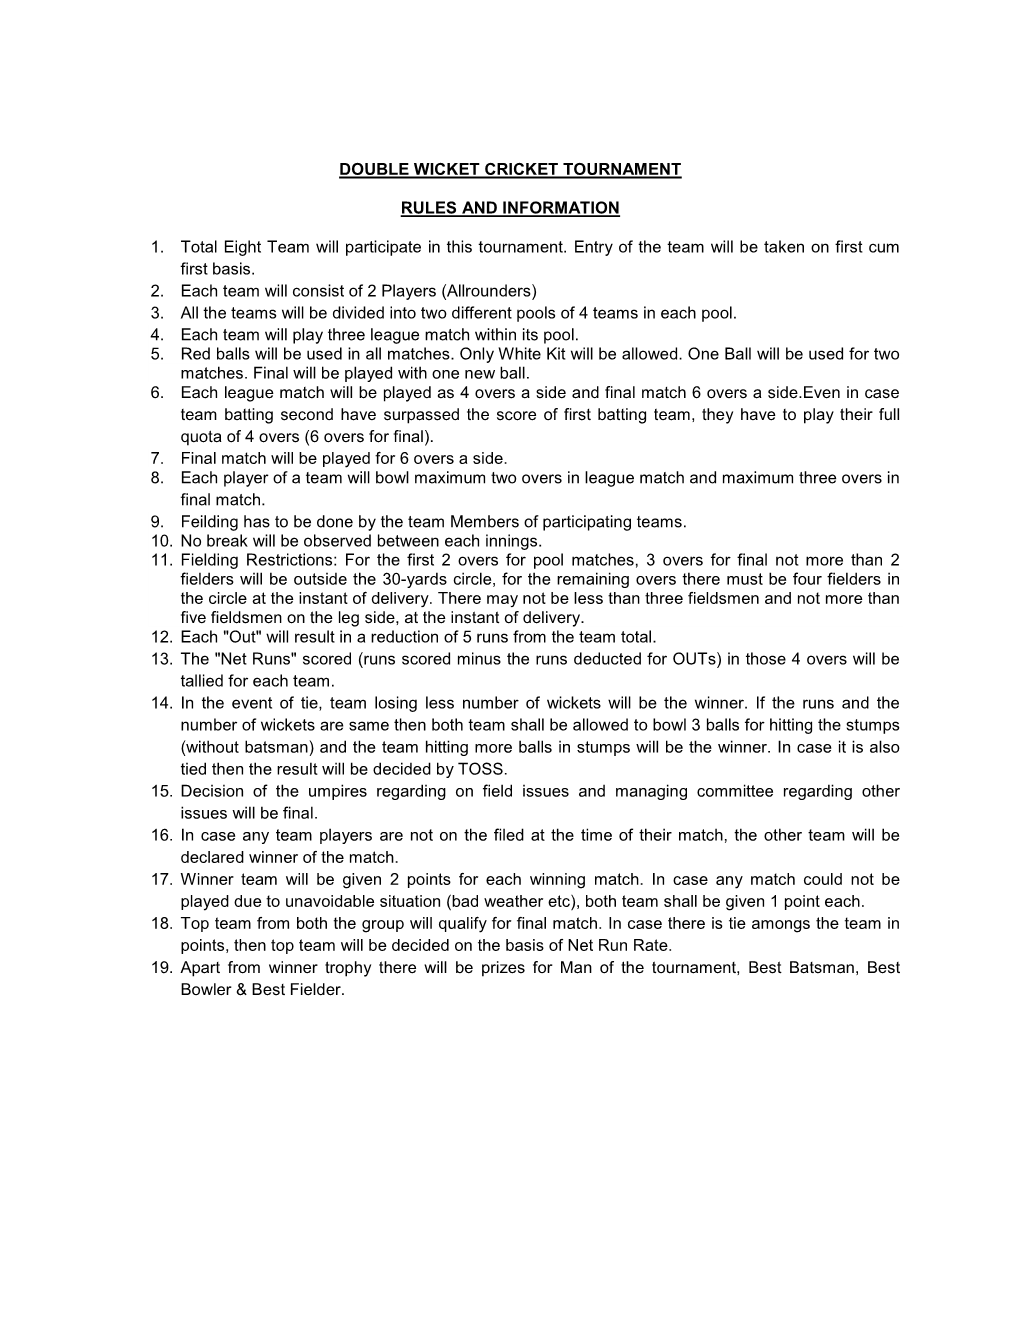 DOUBLE WICKET CRICKET TOURNAMENT RULES and INFORMATION 1. Total Eight Team Will Participate in This Tournament. Entry of The